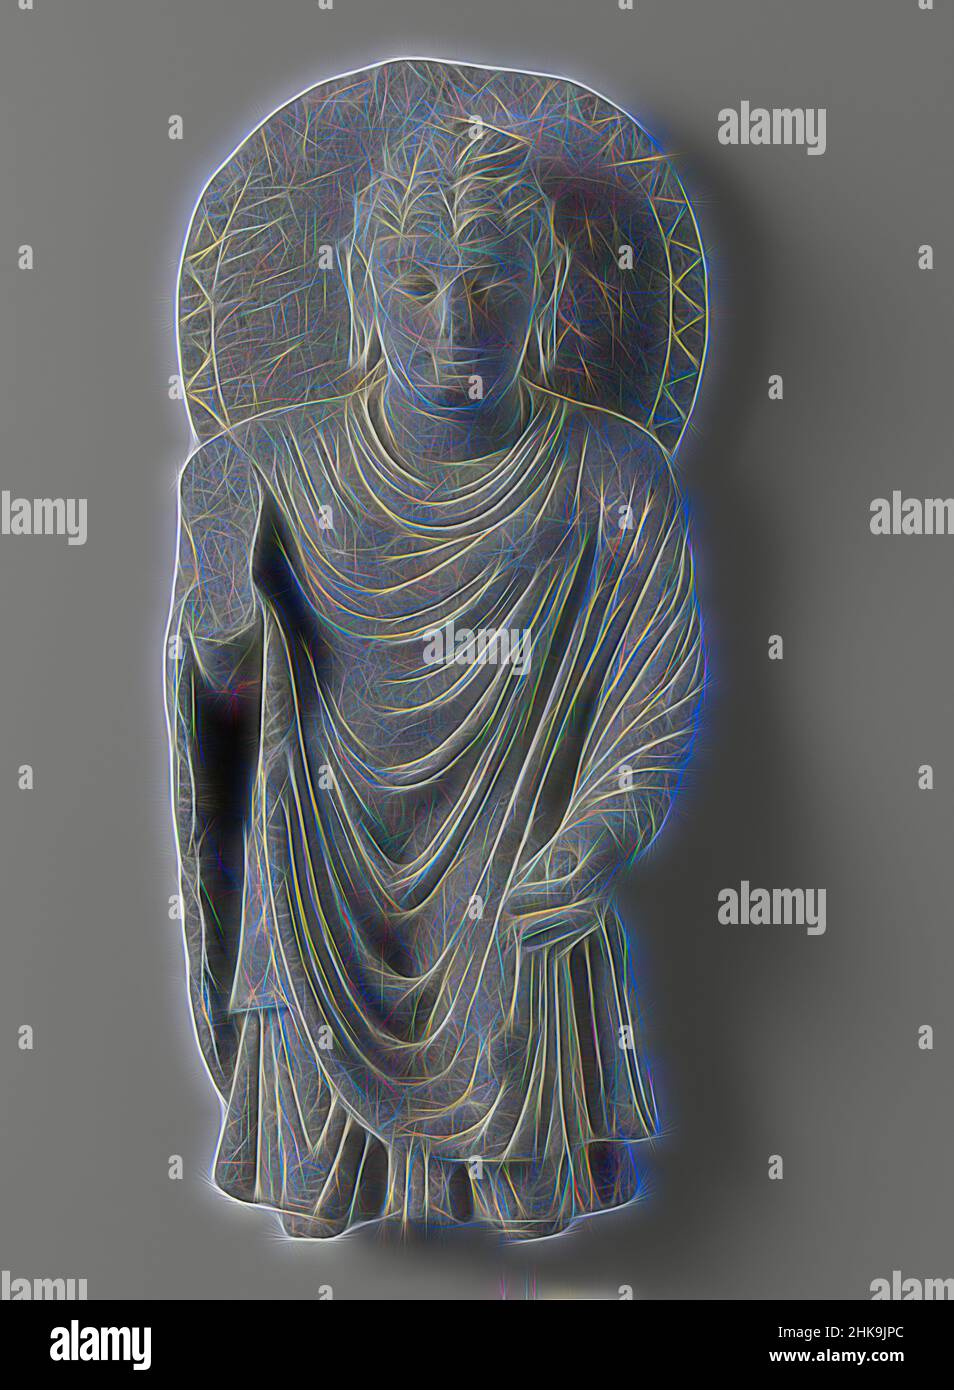 Inspired by Image of standing Buddha, Image of standing Buddha., Gandhara, c. 100 - c. 300, slate (rock), height 46.0 cm × height 57.0 cm × width 20.7 cm × depth 12.1 cm × weight 11.5 kg, Reimagined by Artotop. Classic art reinvented with a modern twist. Design of warm cheerful glowing of brightness and light ray radiance. Photography inspired by surrealism and futurism, embracing dynamic energy of modern technology, movement, speed and revolutionize culture Stock Photo